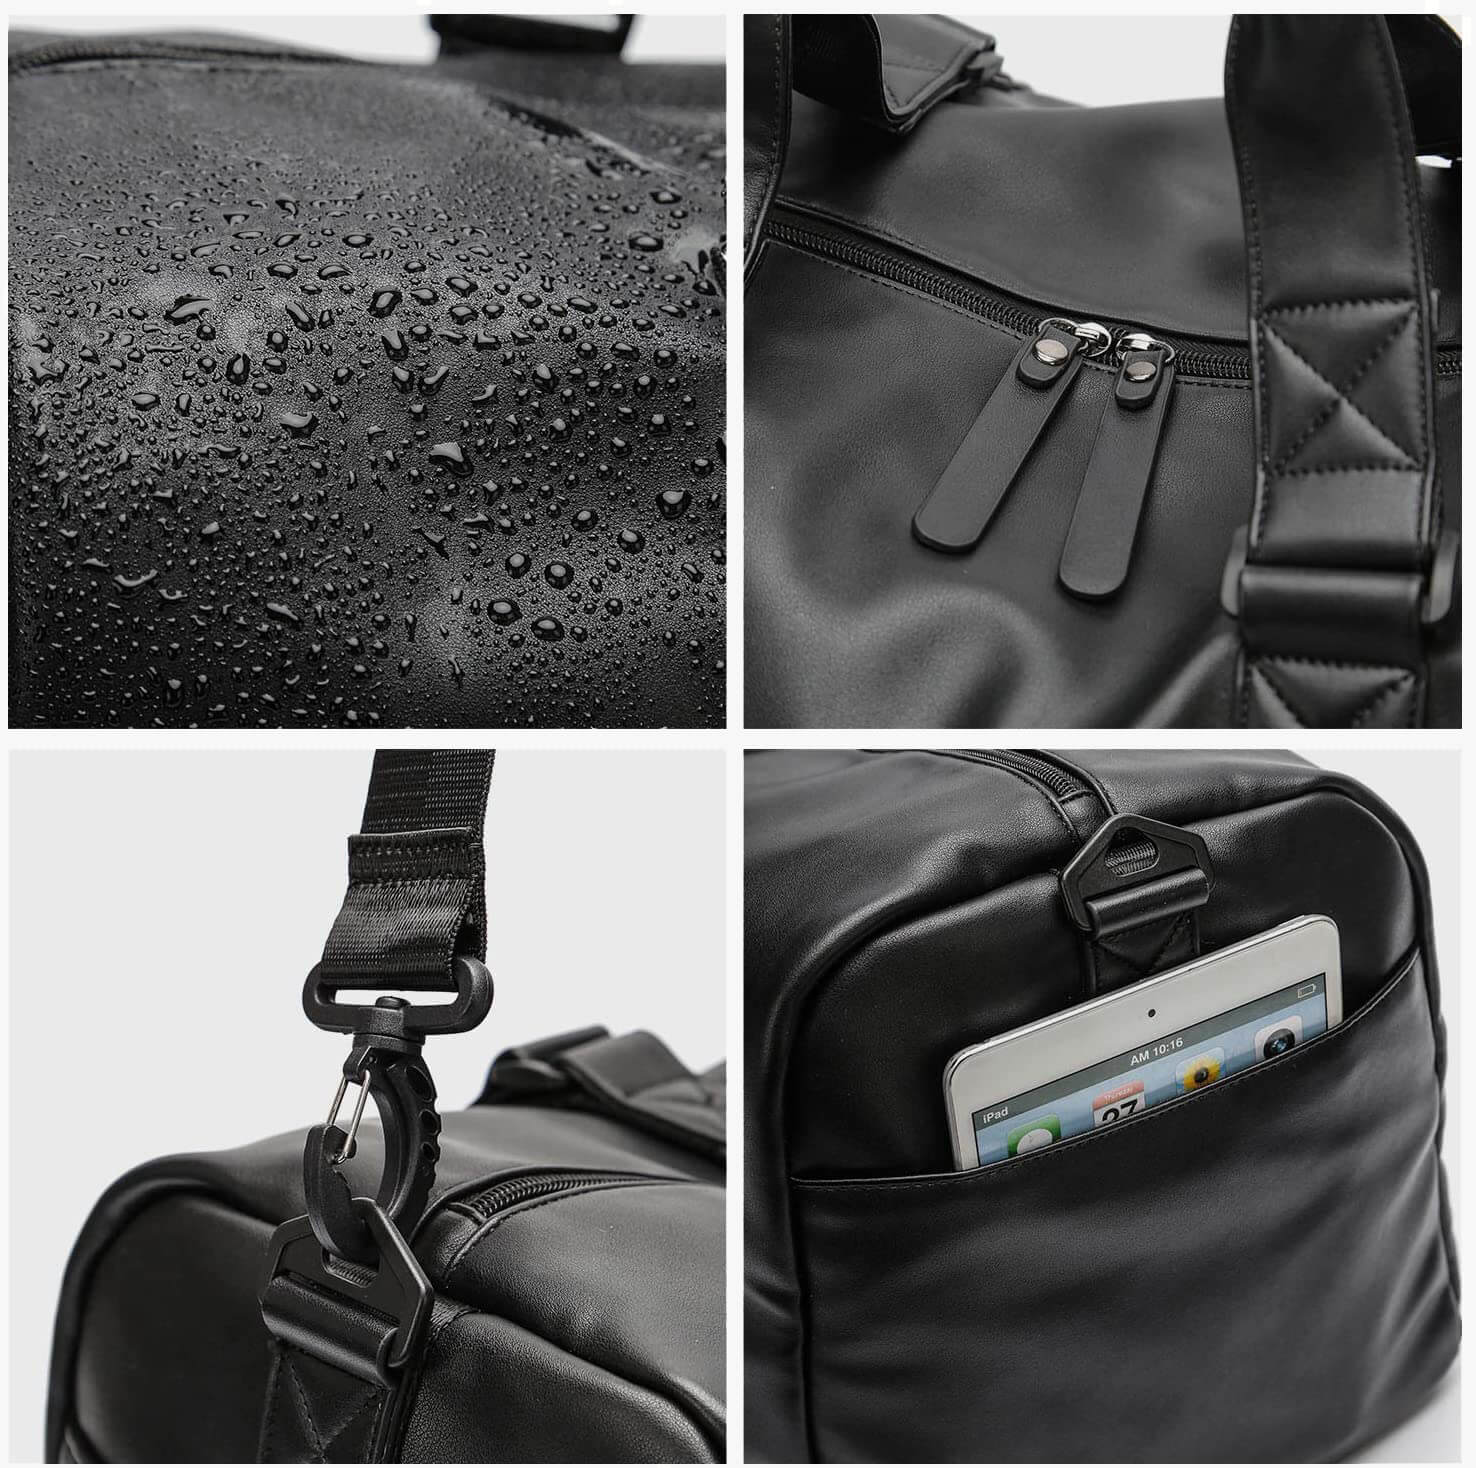 Sports Travel Leather Duffle Bag -Sturdy Material